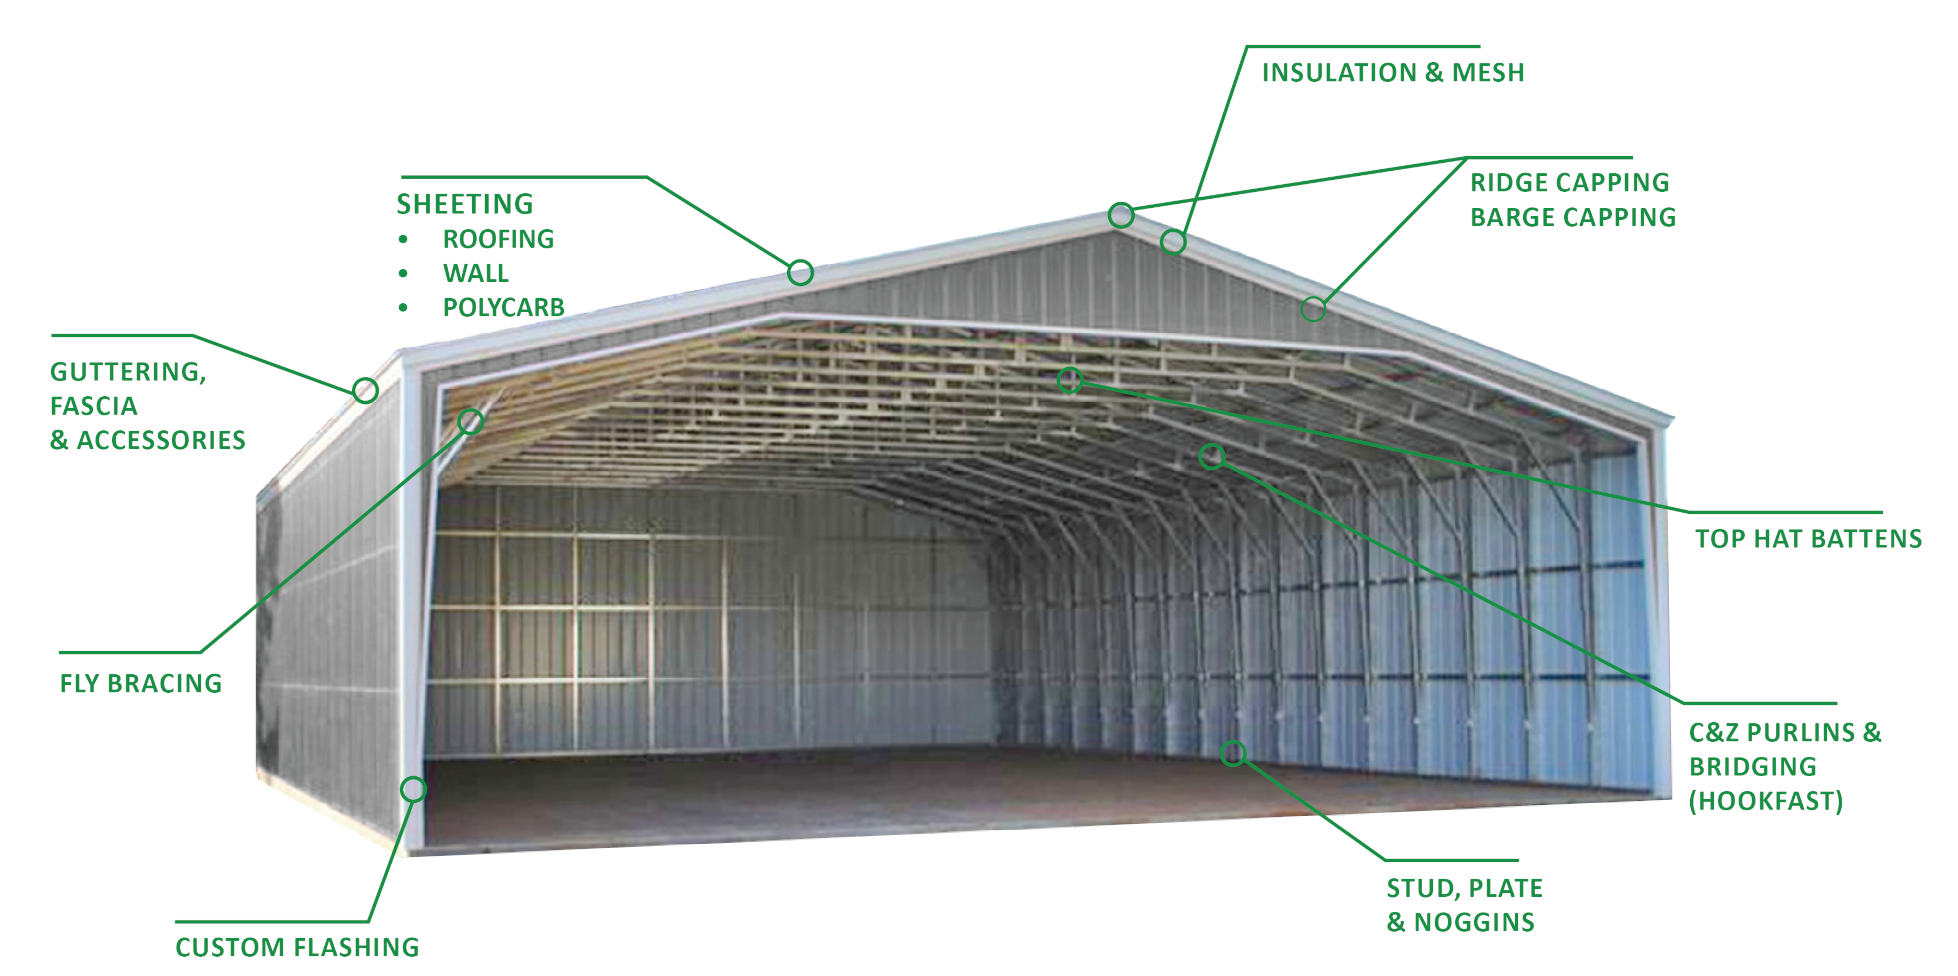 Shed Information Graphic